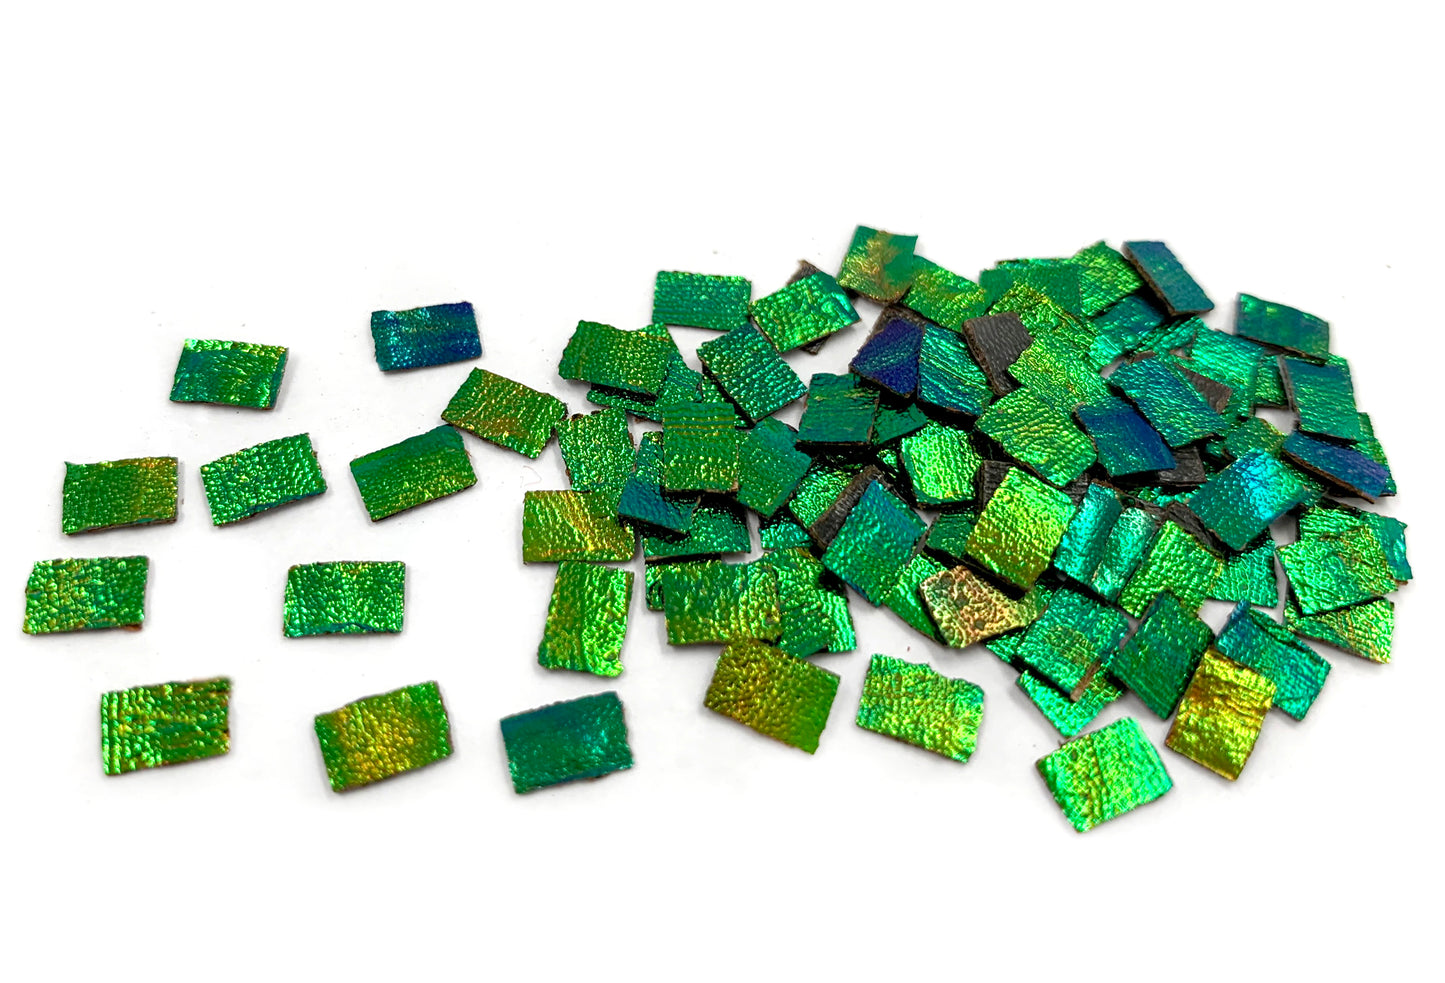 Jewel Beetle Wings UNDRILLED NO-HOLE 100 Pcs Natural Wings - Rectangle 4 X 6 MM